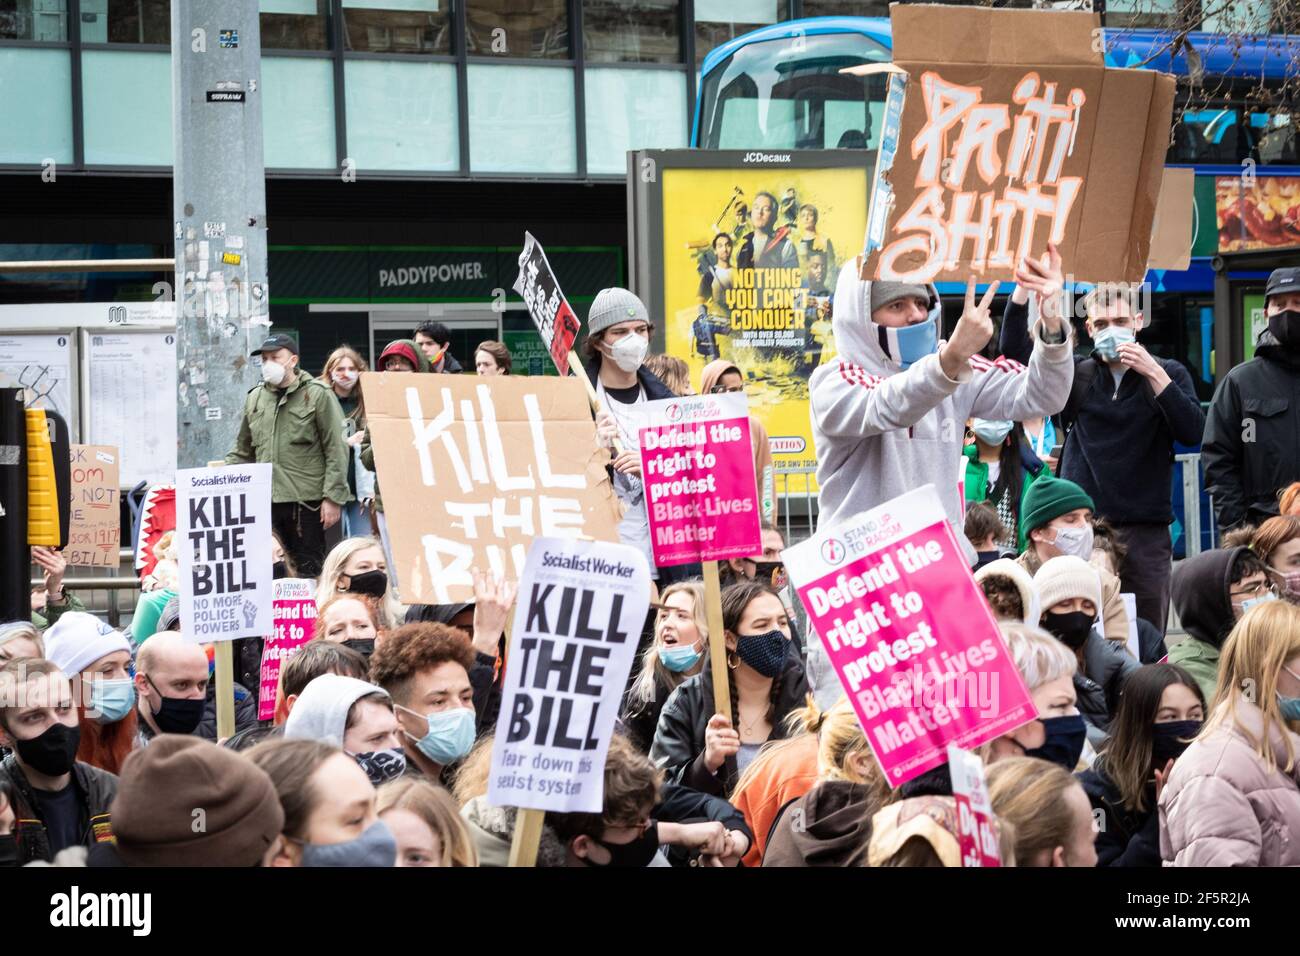 Manchester, UK. 27th Mar, 2021. Protesters stage a sit-in protest at Piccadilly bus terminal during a 'Kill The Bill' demonstration. People come out to the streets to protest against the new policing bill. The new legislation will give the police more powers to control protests. Credit: Andy Barton/Alamy Live News Stock Photo